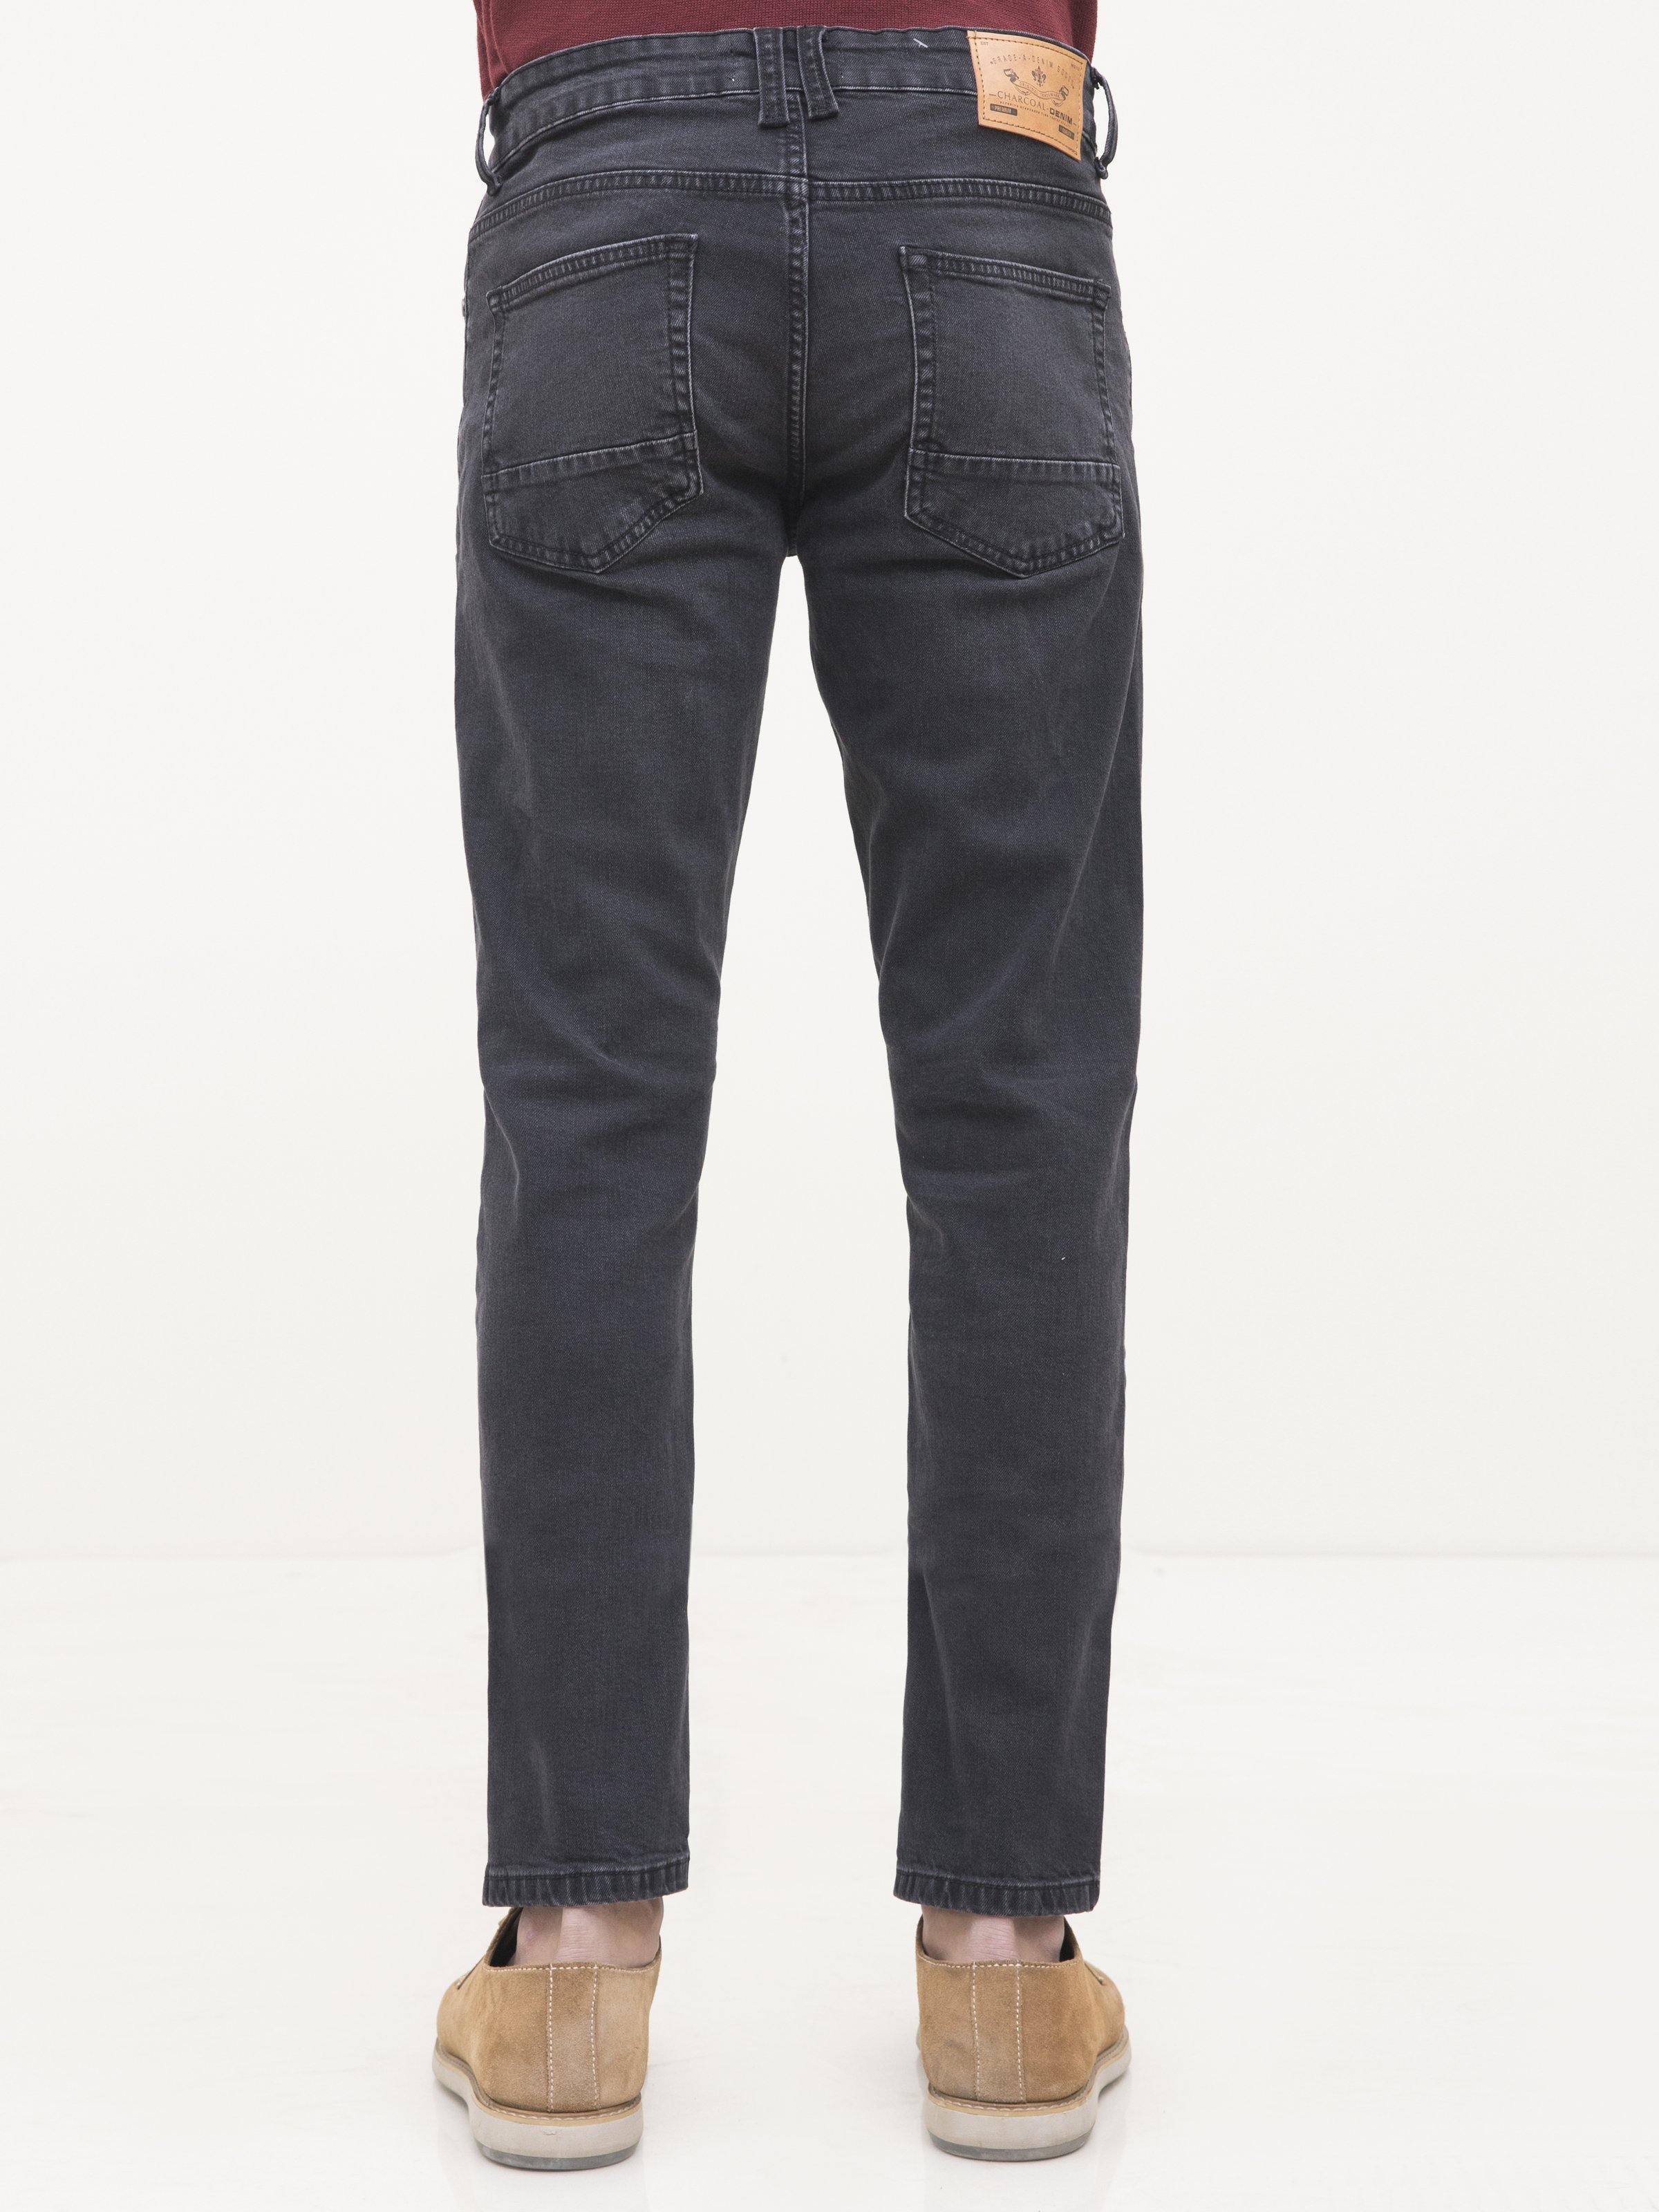 JEANS SLIM FIT DARK GREY at Charcoal Clothing